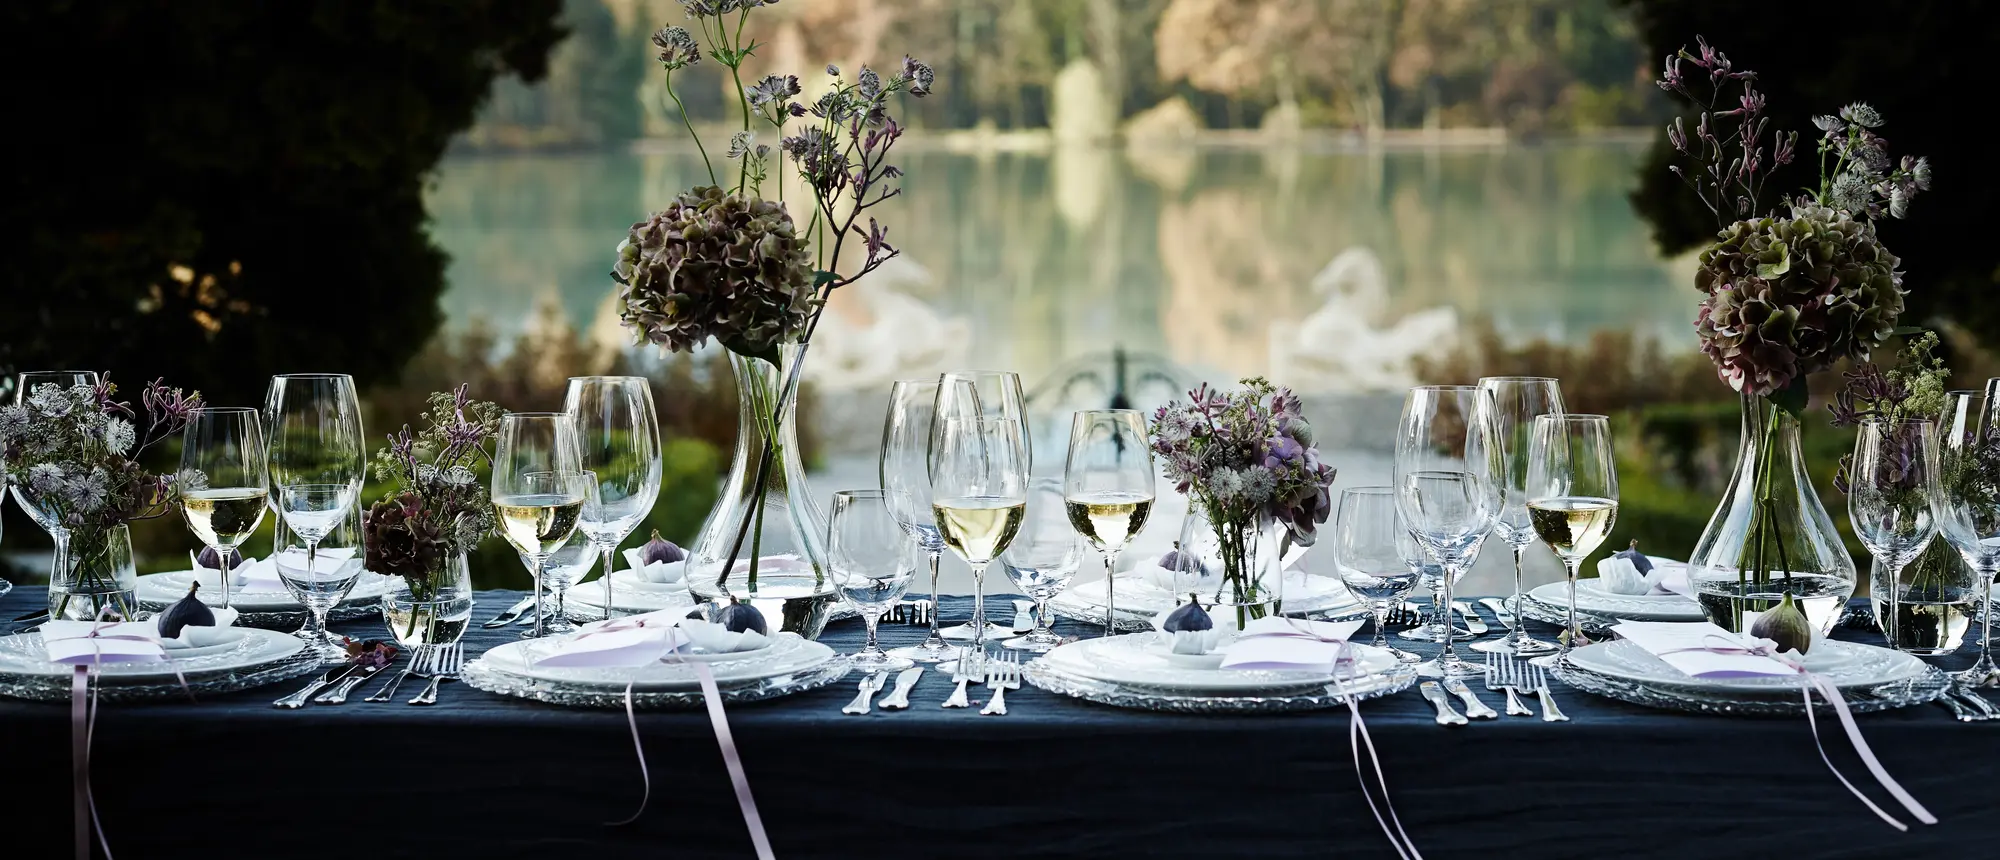 Table setting by a lake